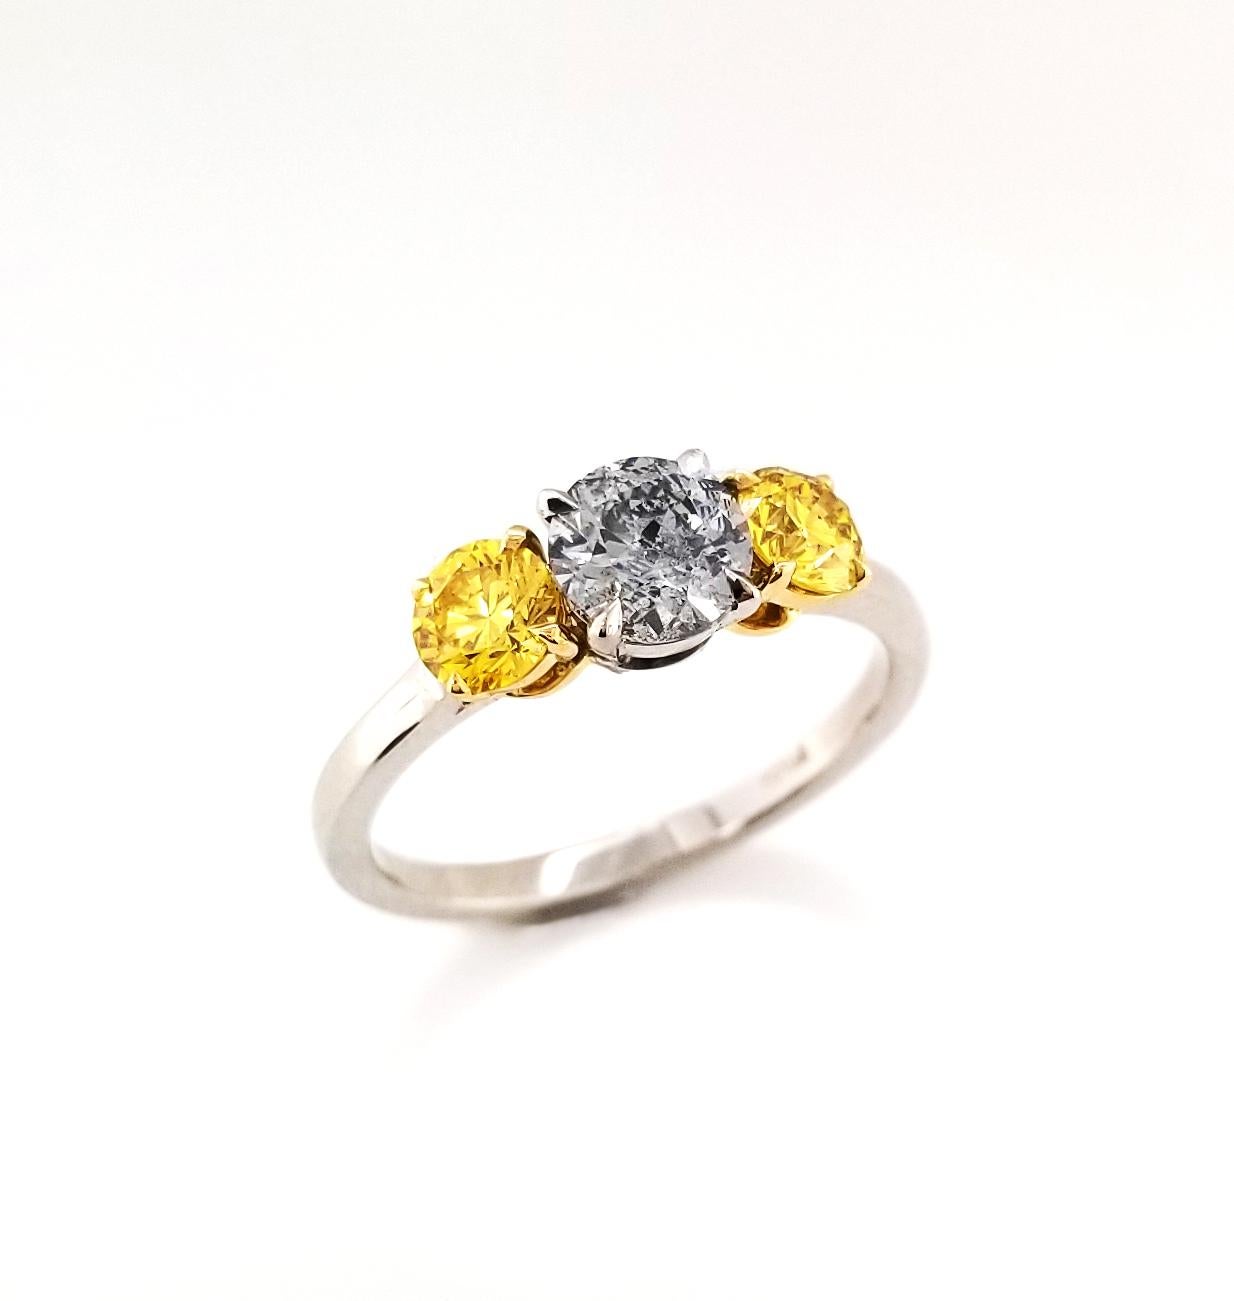 Fancy Gray-Blue and Vivid Yellow Diamonds Engagement Ring Jacket in Platinum GIA In New Condition For Sale In New York, NY